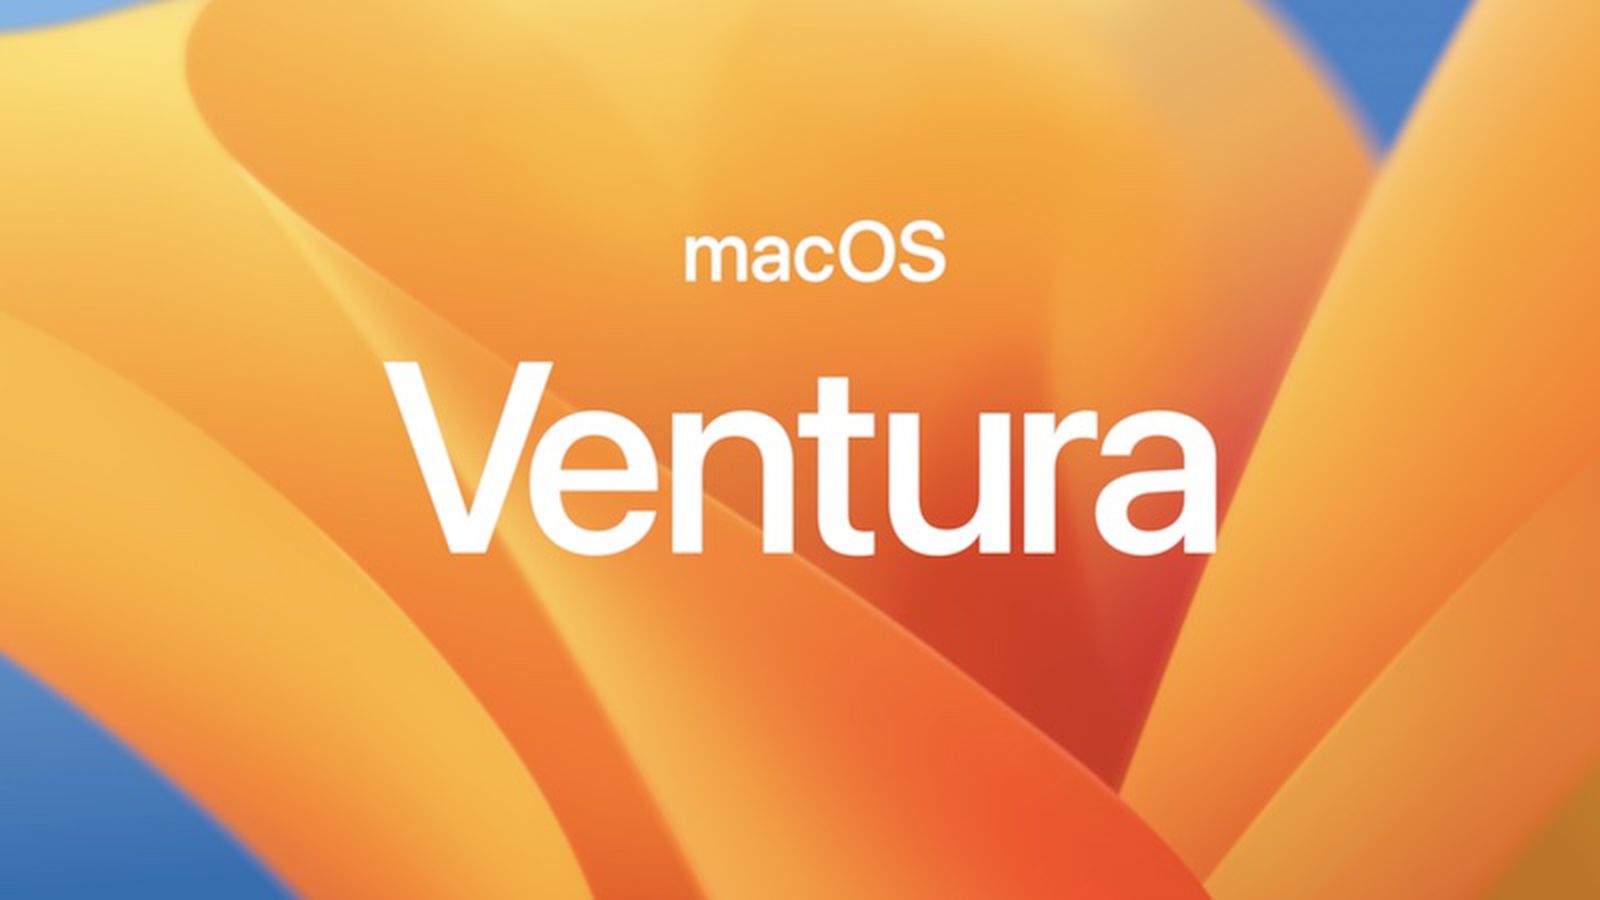 macOS Ventura With Stage Manager and More Launching October 24 - MacRumors